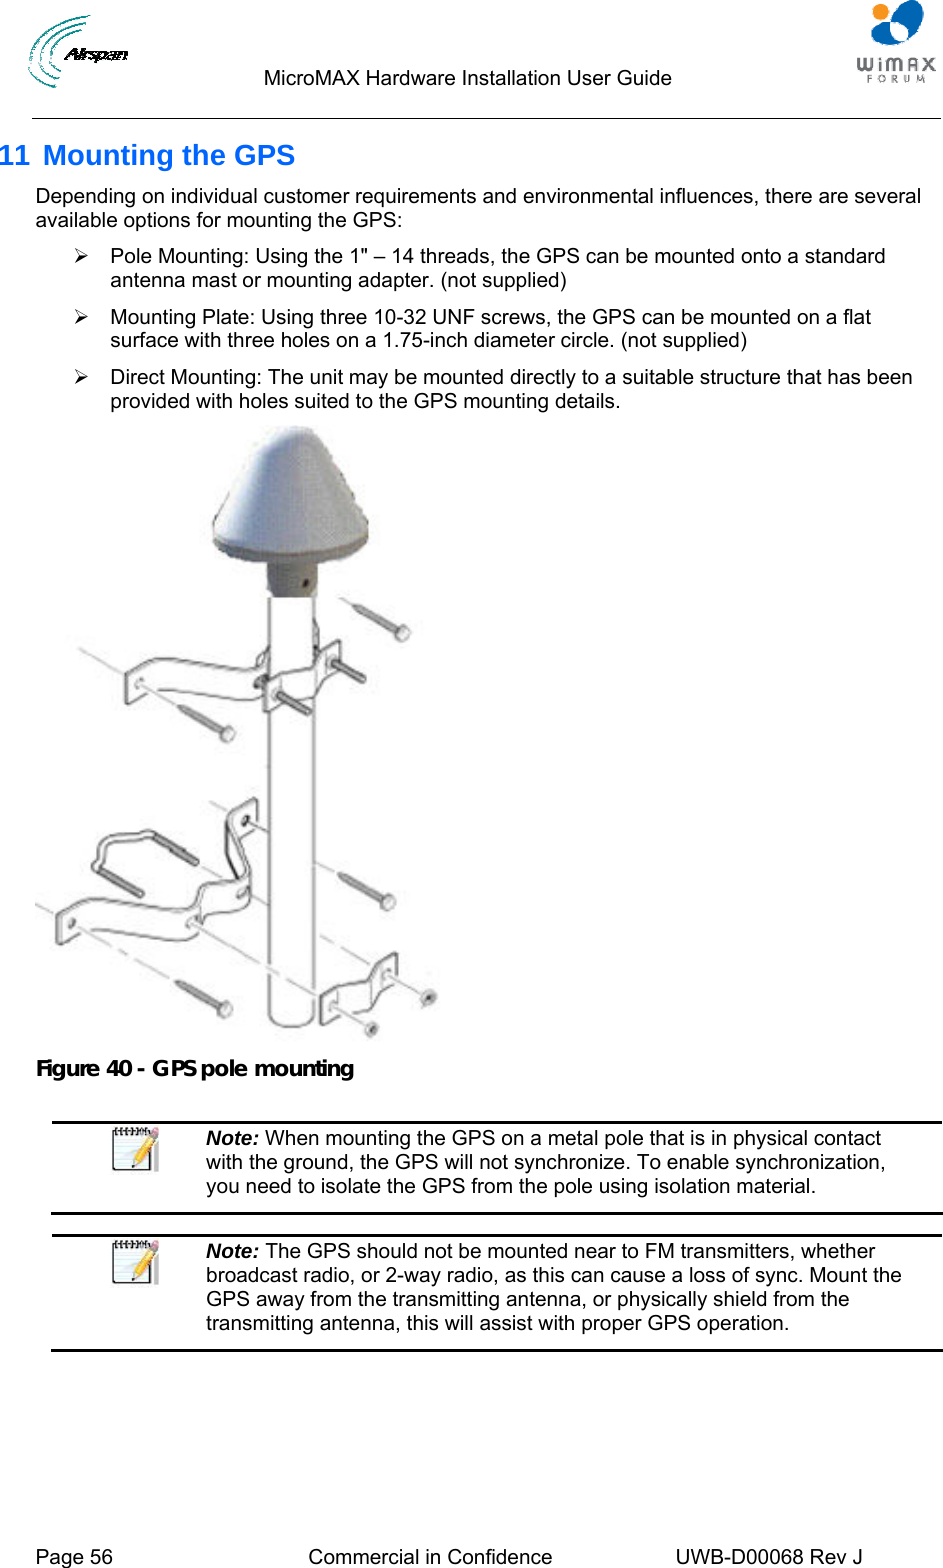                                  MicroMAX Hardware Installation User Guide     Page 56  Commercial in Confidence  UWB-D00068 Rev J   11 Mounting the GPS Depending on individual customer requirements and environmental influences, there are several available options for mounting the GPS: ¾  Pole Mounting: Using the 1&quot; – 14 threads, the GPS can be mounted onto a standard antenna mast or mounting adapter. (not supplied) ¾  Mounting Plate: Using three 10-32 UNF screws, the GPS can be mounted on a flat surface with three holes on a 1.75-inch diameter circle. (not supplied) ¾  Direct Mounting: The unit may be mounted directly to a suitable structure that has been provided with holes suited to the GPS mounting details.  Figure 40 - GPS pole mounting   Note: When mounting the GPS on a metal pole that is in physical contact with the ground, the GPS will not synchronize. To enable synchronization, you need to isolate the GPS from the pole using isolation material.   Note: The GPS should not be mounted near to FM transmitters, whether broadcast radio, or 2-way radio, as this can cause a loss of sync. Mount the GPS away from the transmitting antenna, or physically shield from the transmitting antenna, this will assist with proper GPS operation.   